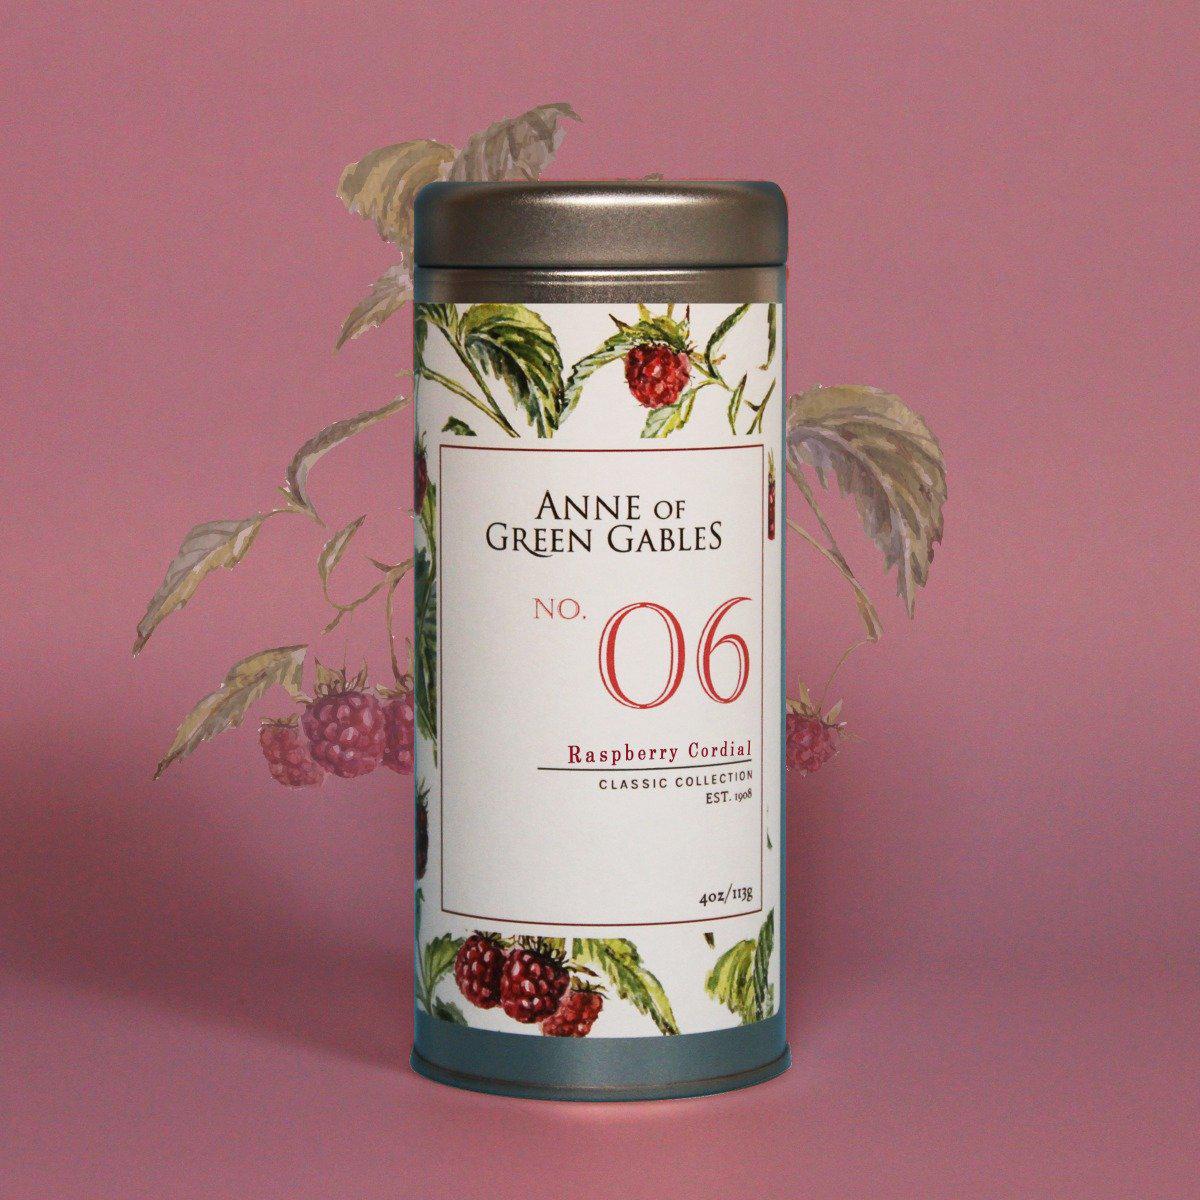 Raspberry Cordial with raspberries in the background